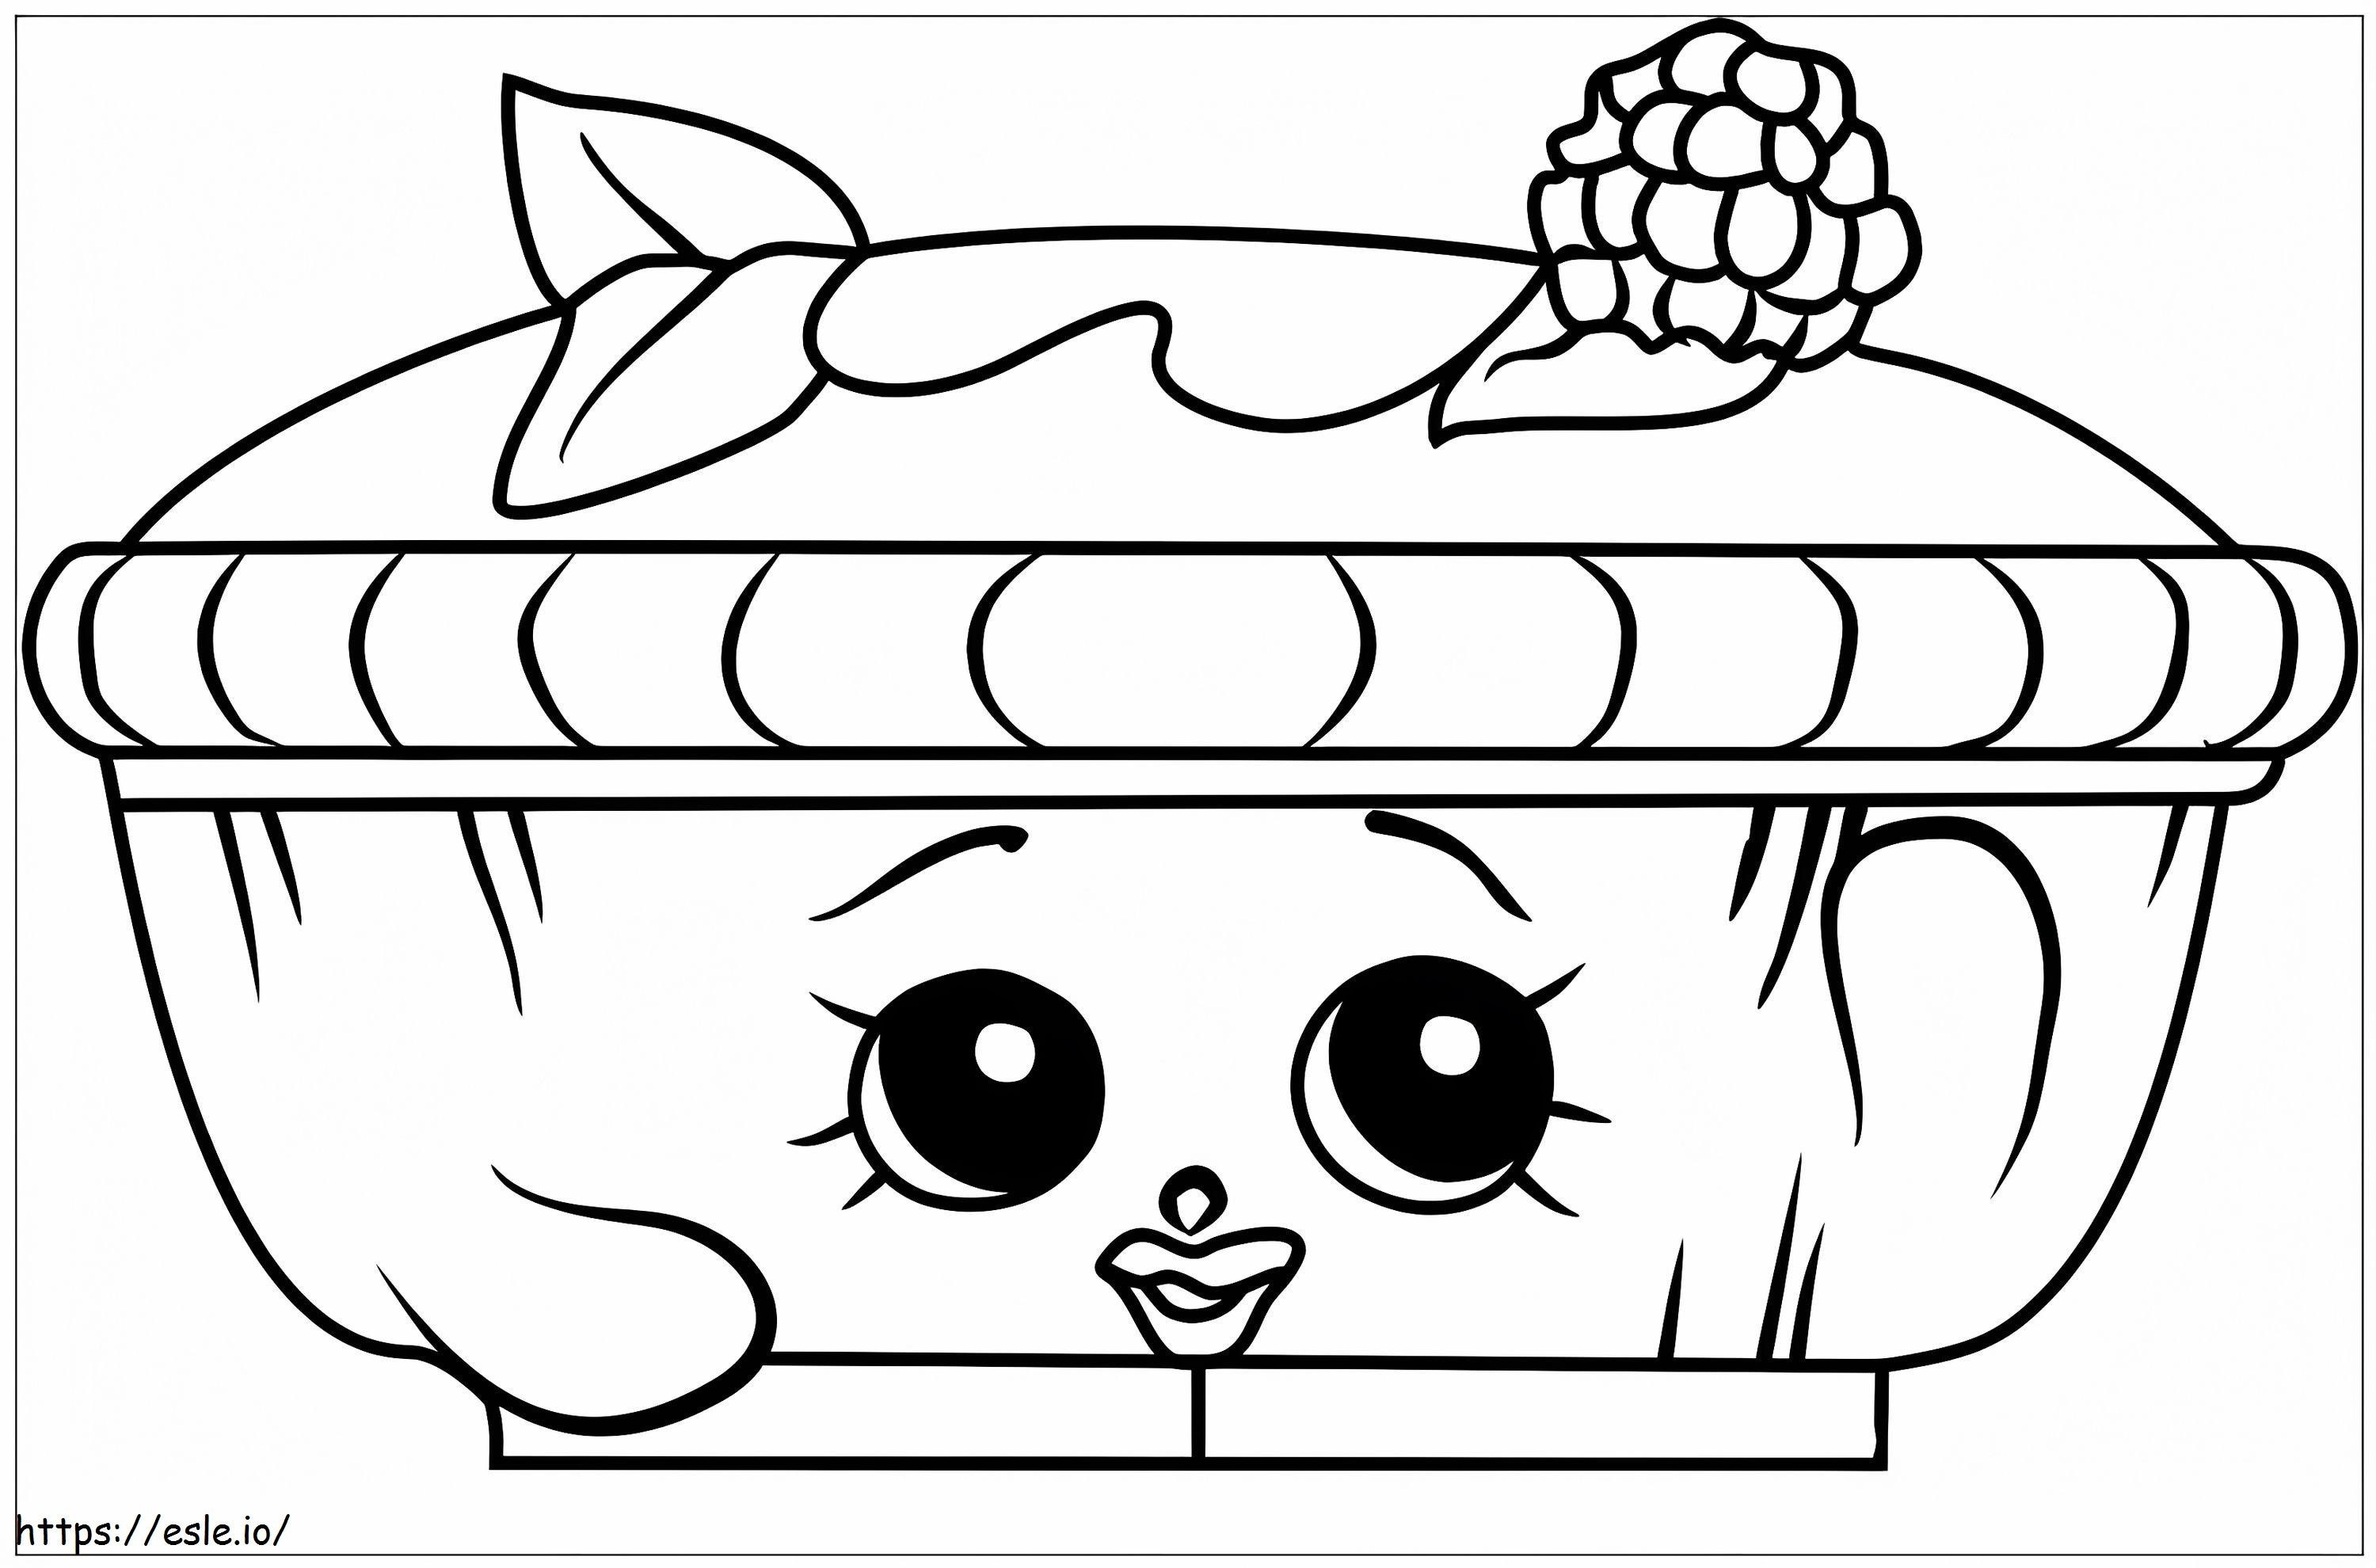 Queen Of Tarts Shopkins coloring page